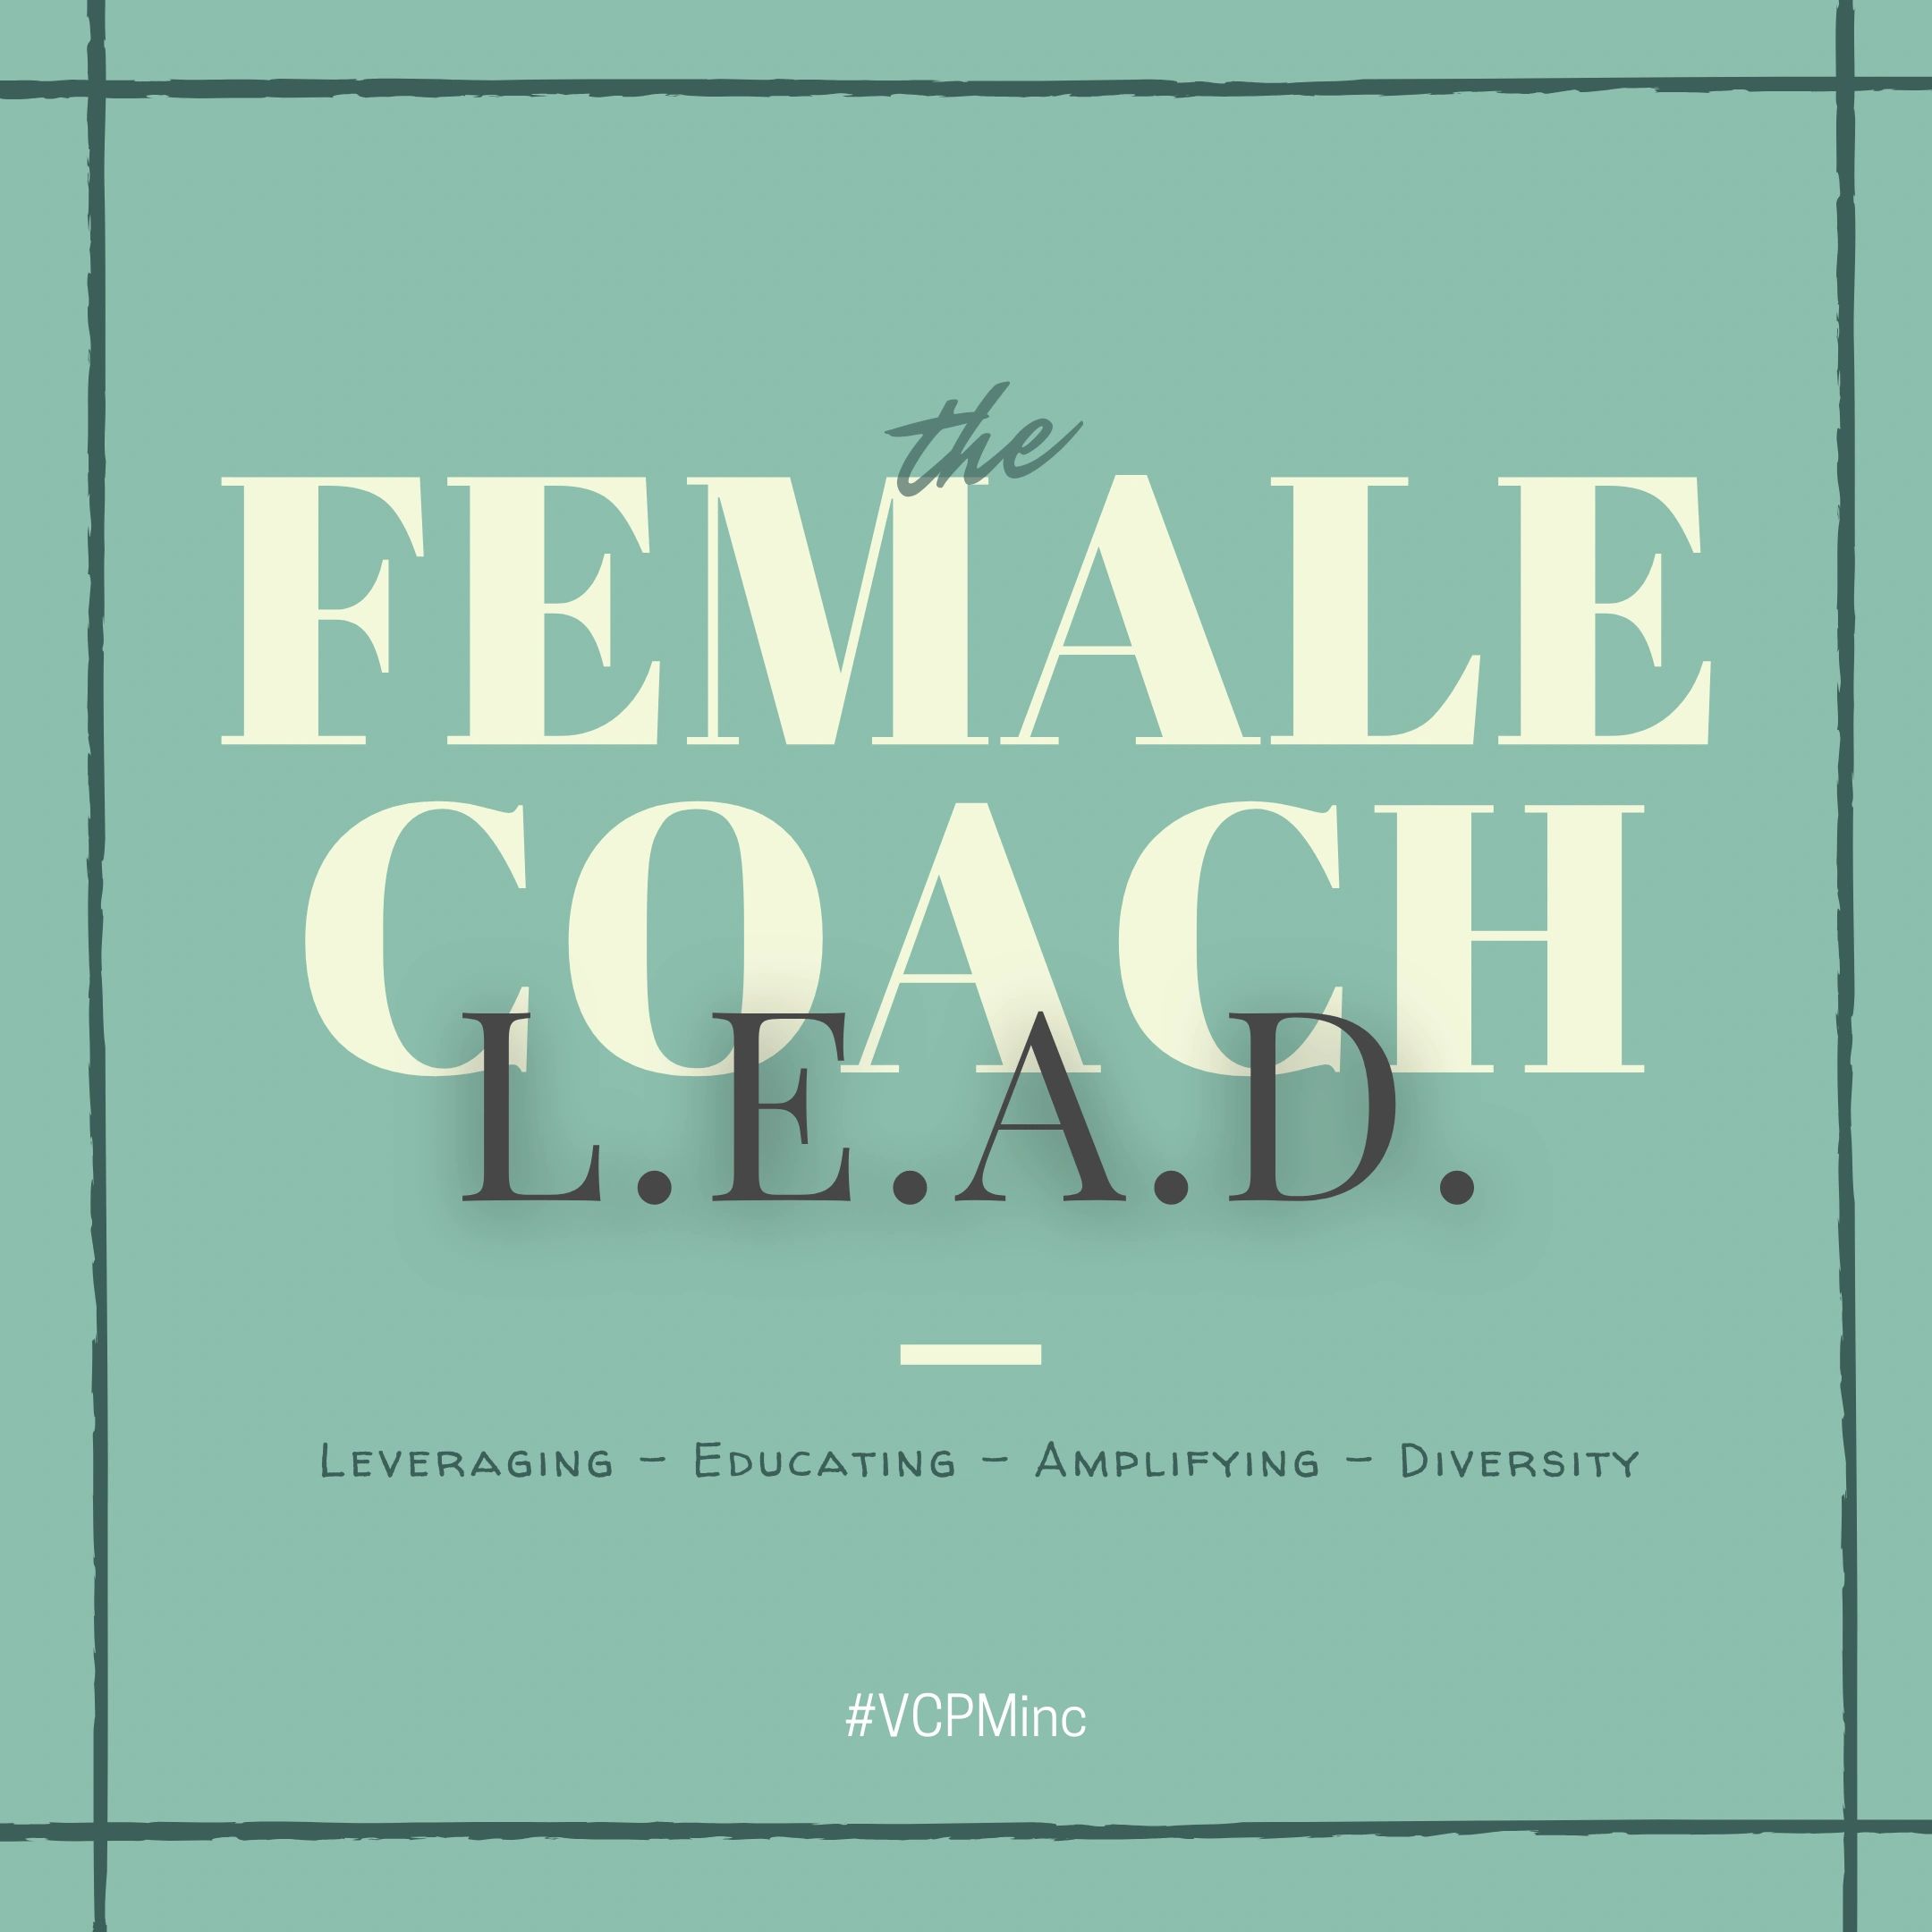 The Female Coach L.E.A.D. (Leveraging - Educating - Amplifying - Diversity)